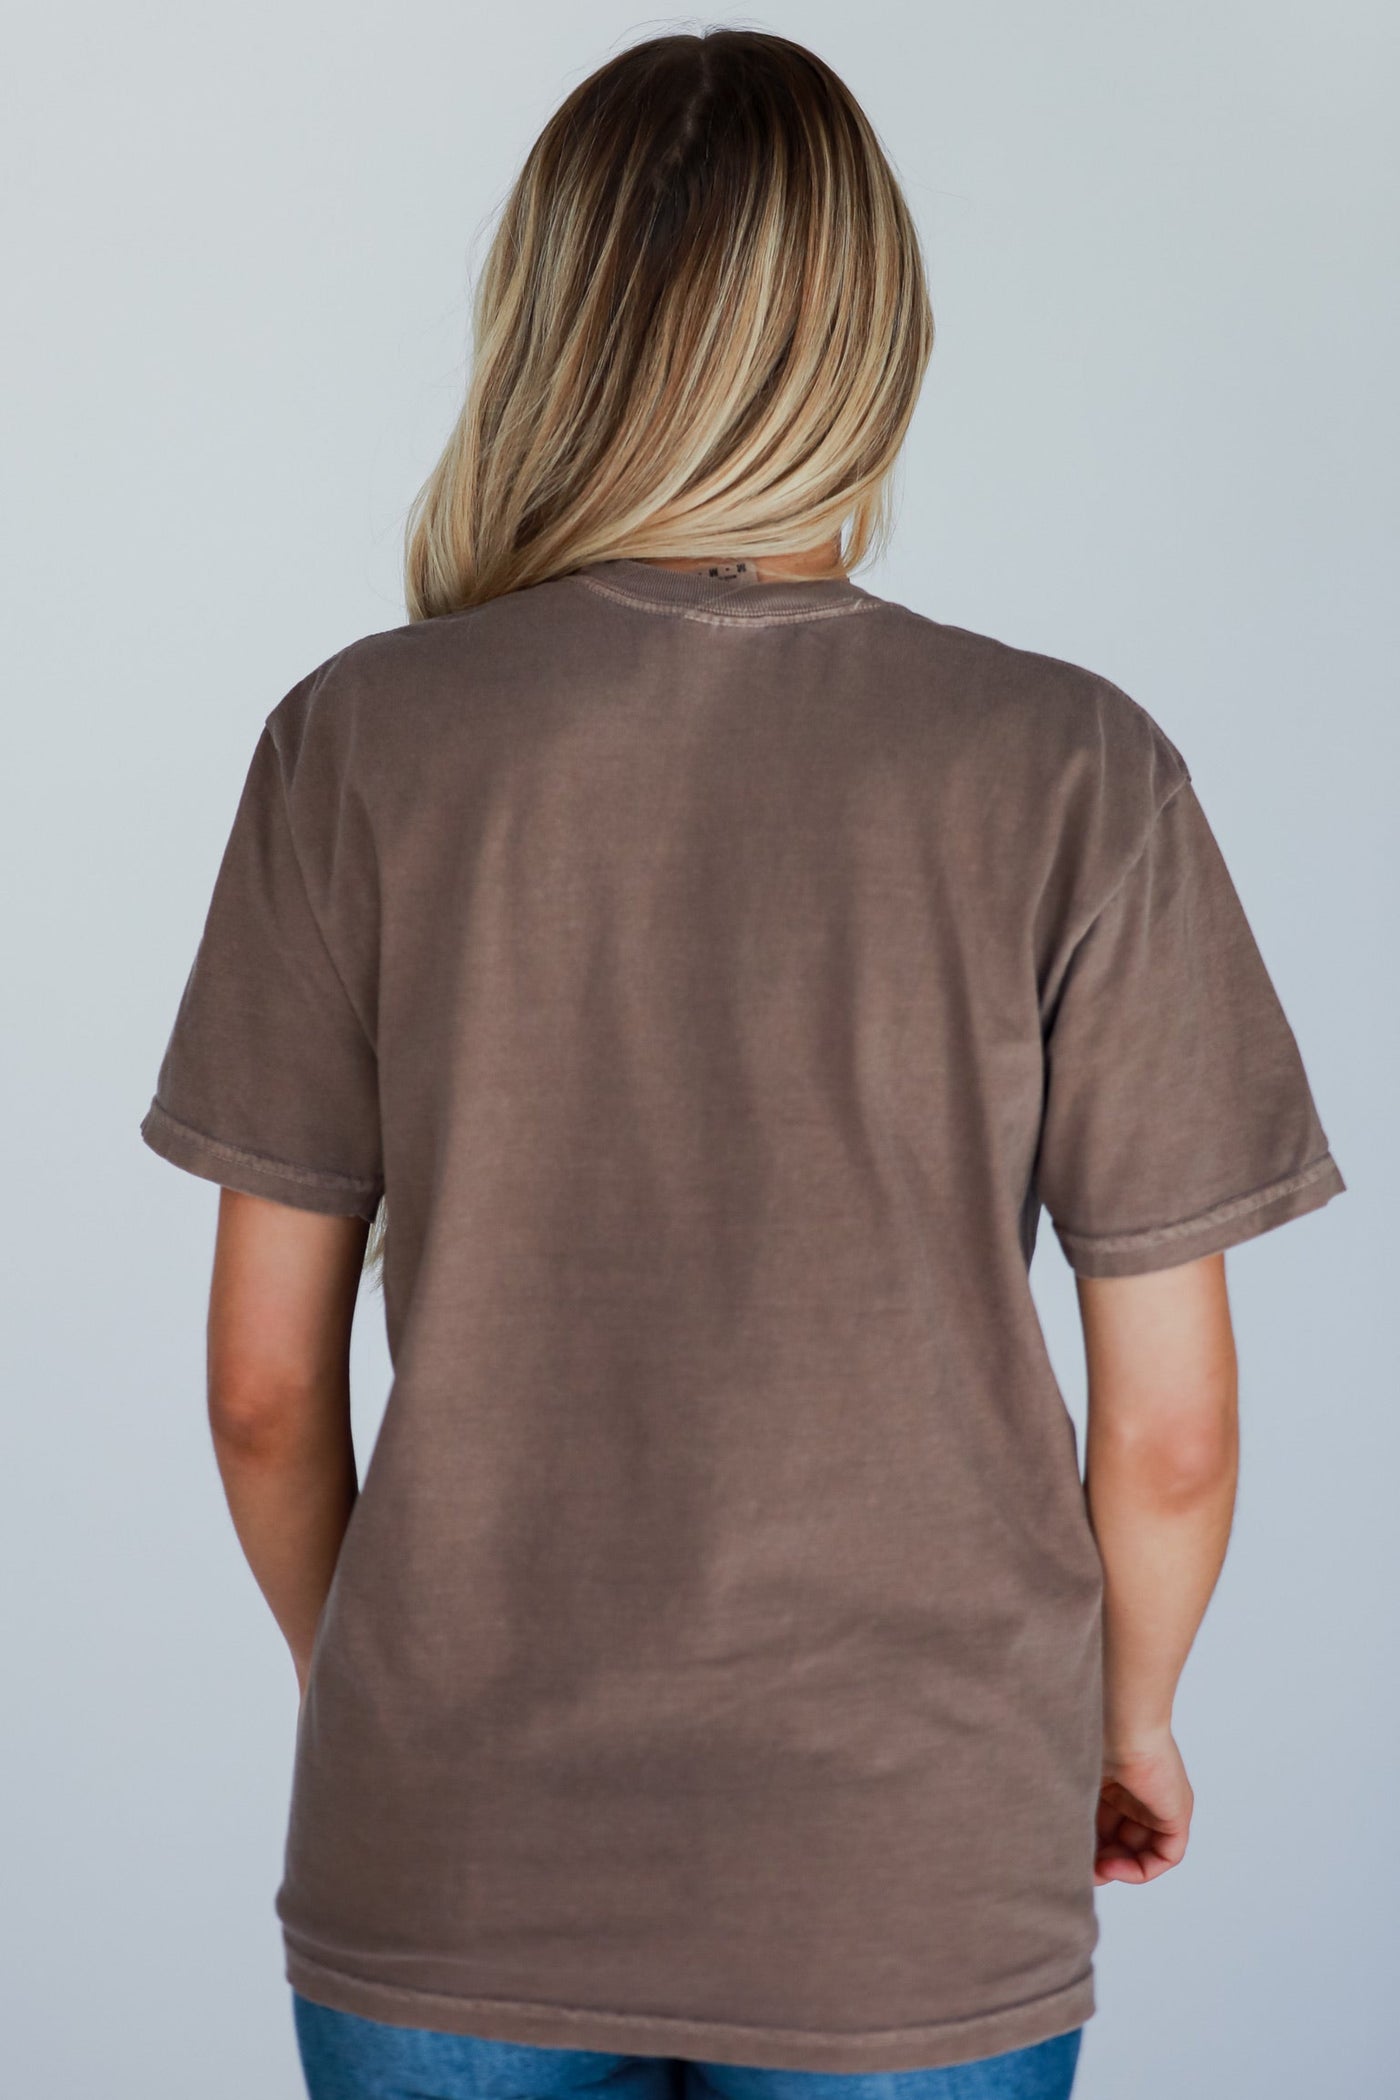 Brown Gainesville Georgia Block Letter Tee back view